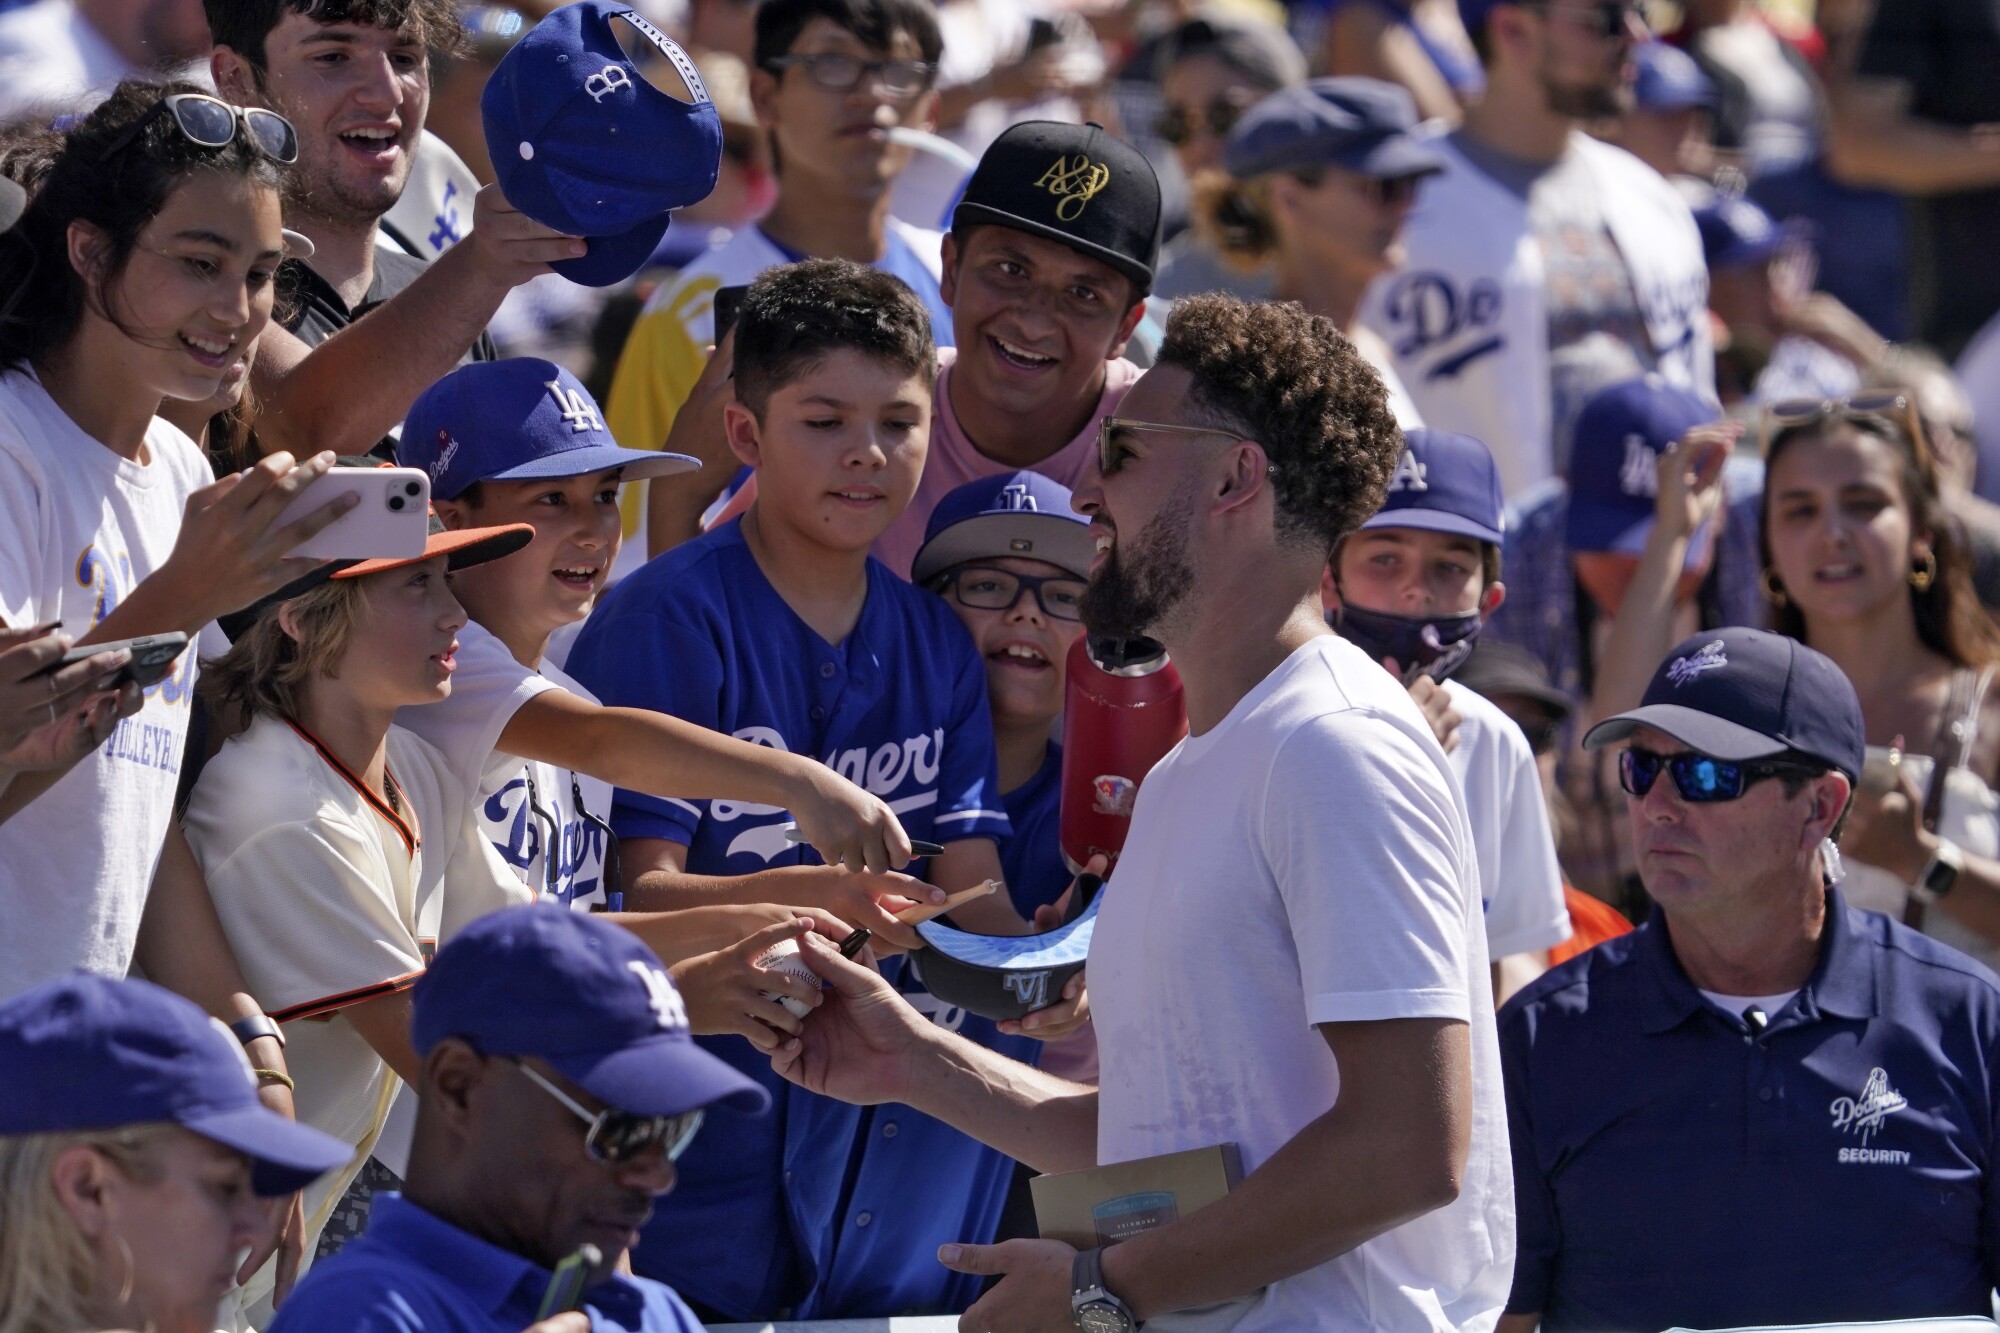 Golden State Warriors star Klay Thompson signs autographs for fans while watching the Dodgers play against the San Francisco Giants